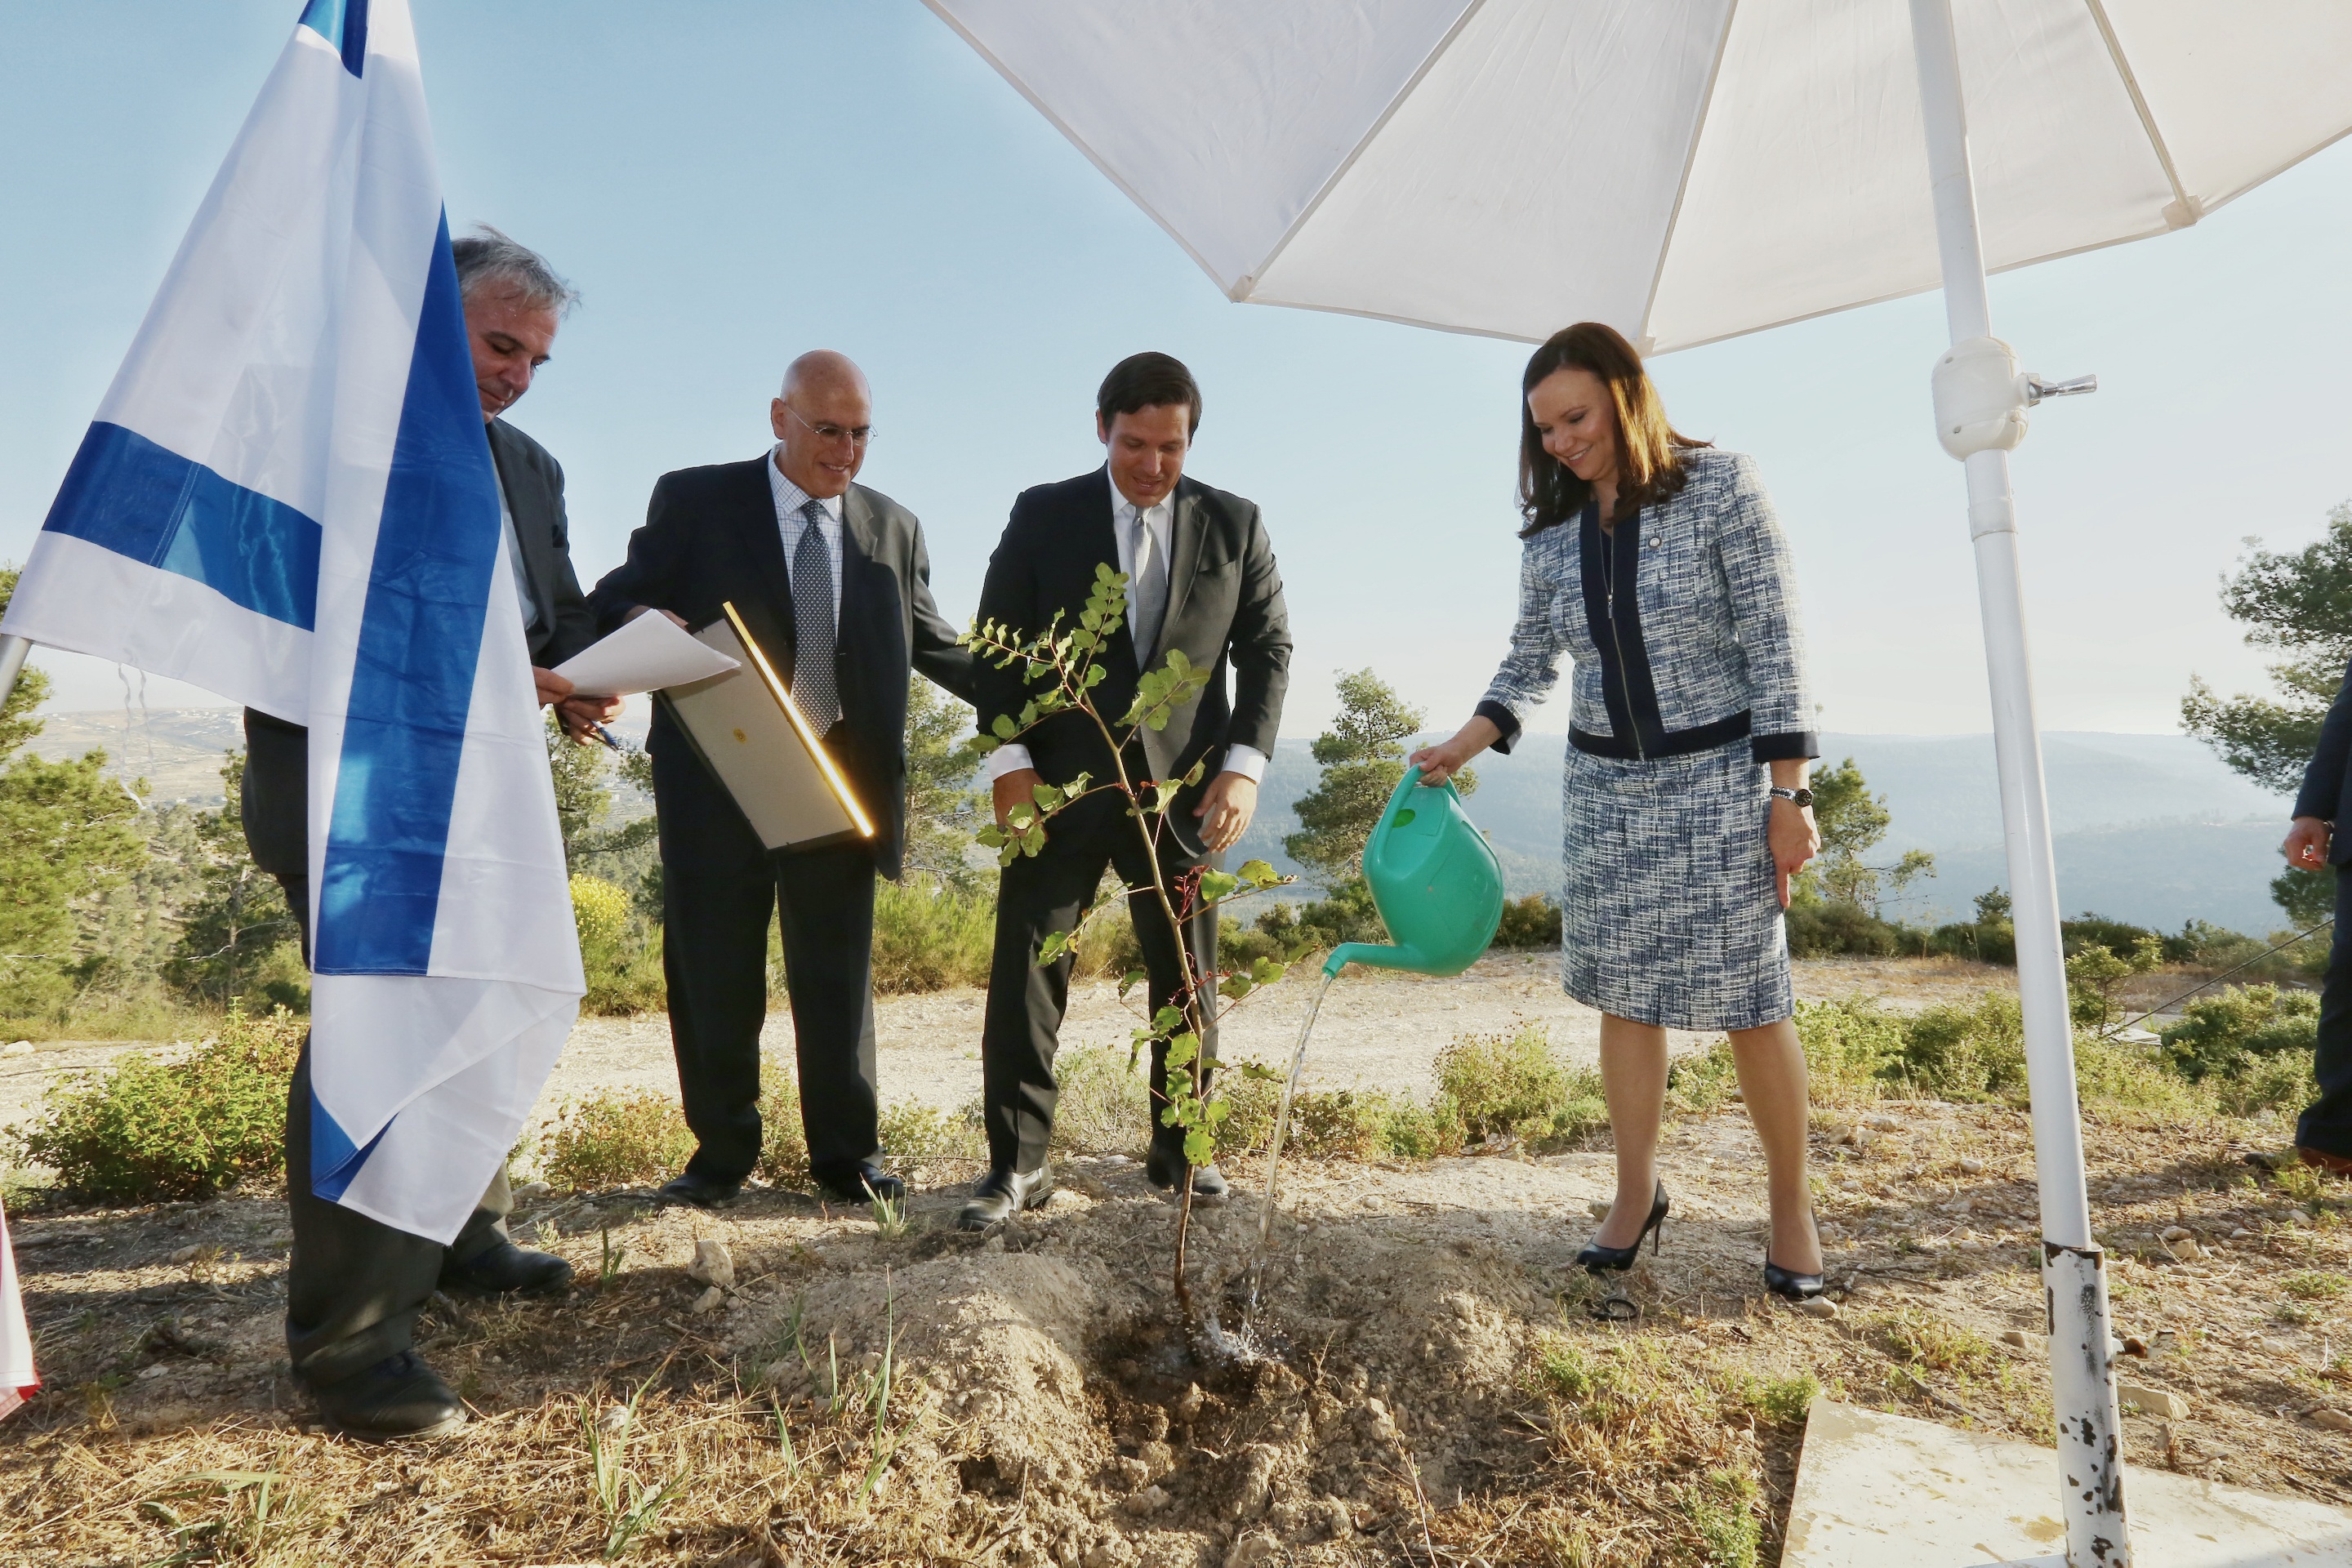   PHOTO RELEASE: Governor Ron DeSantis Plants Tree in John F. Kennedy Peace Forest on Anniversary of JFK’s Birthday